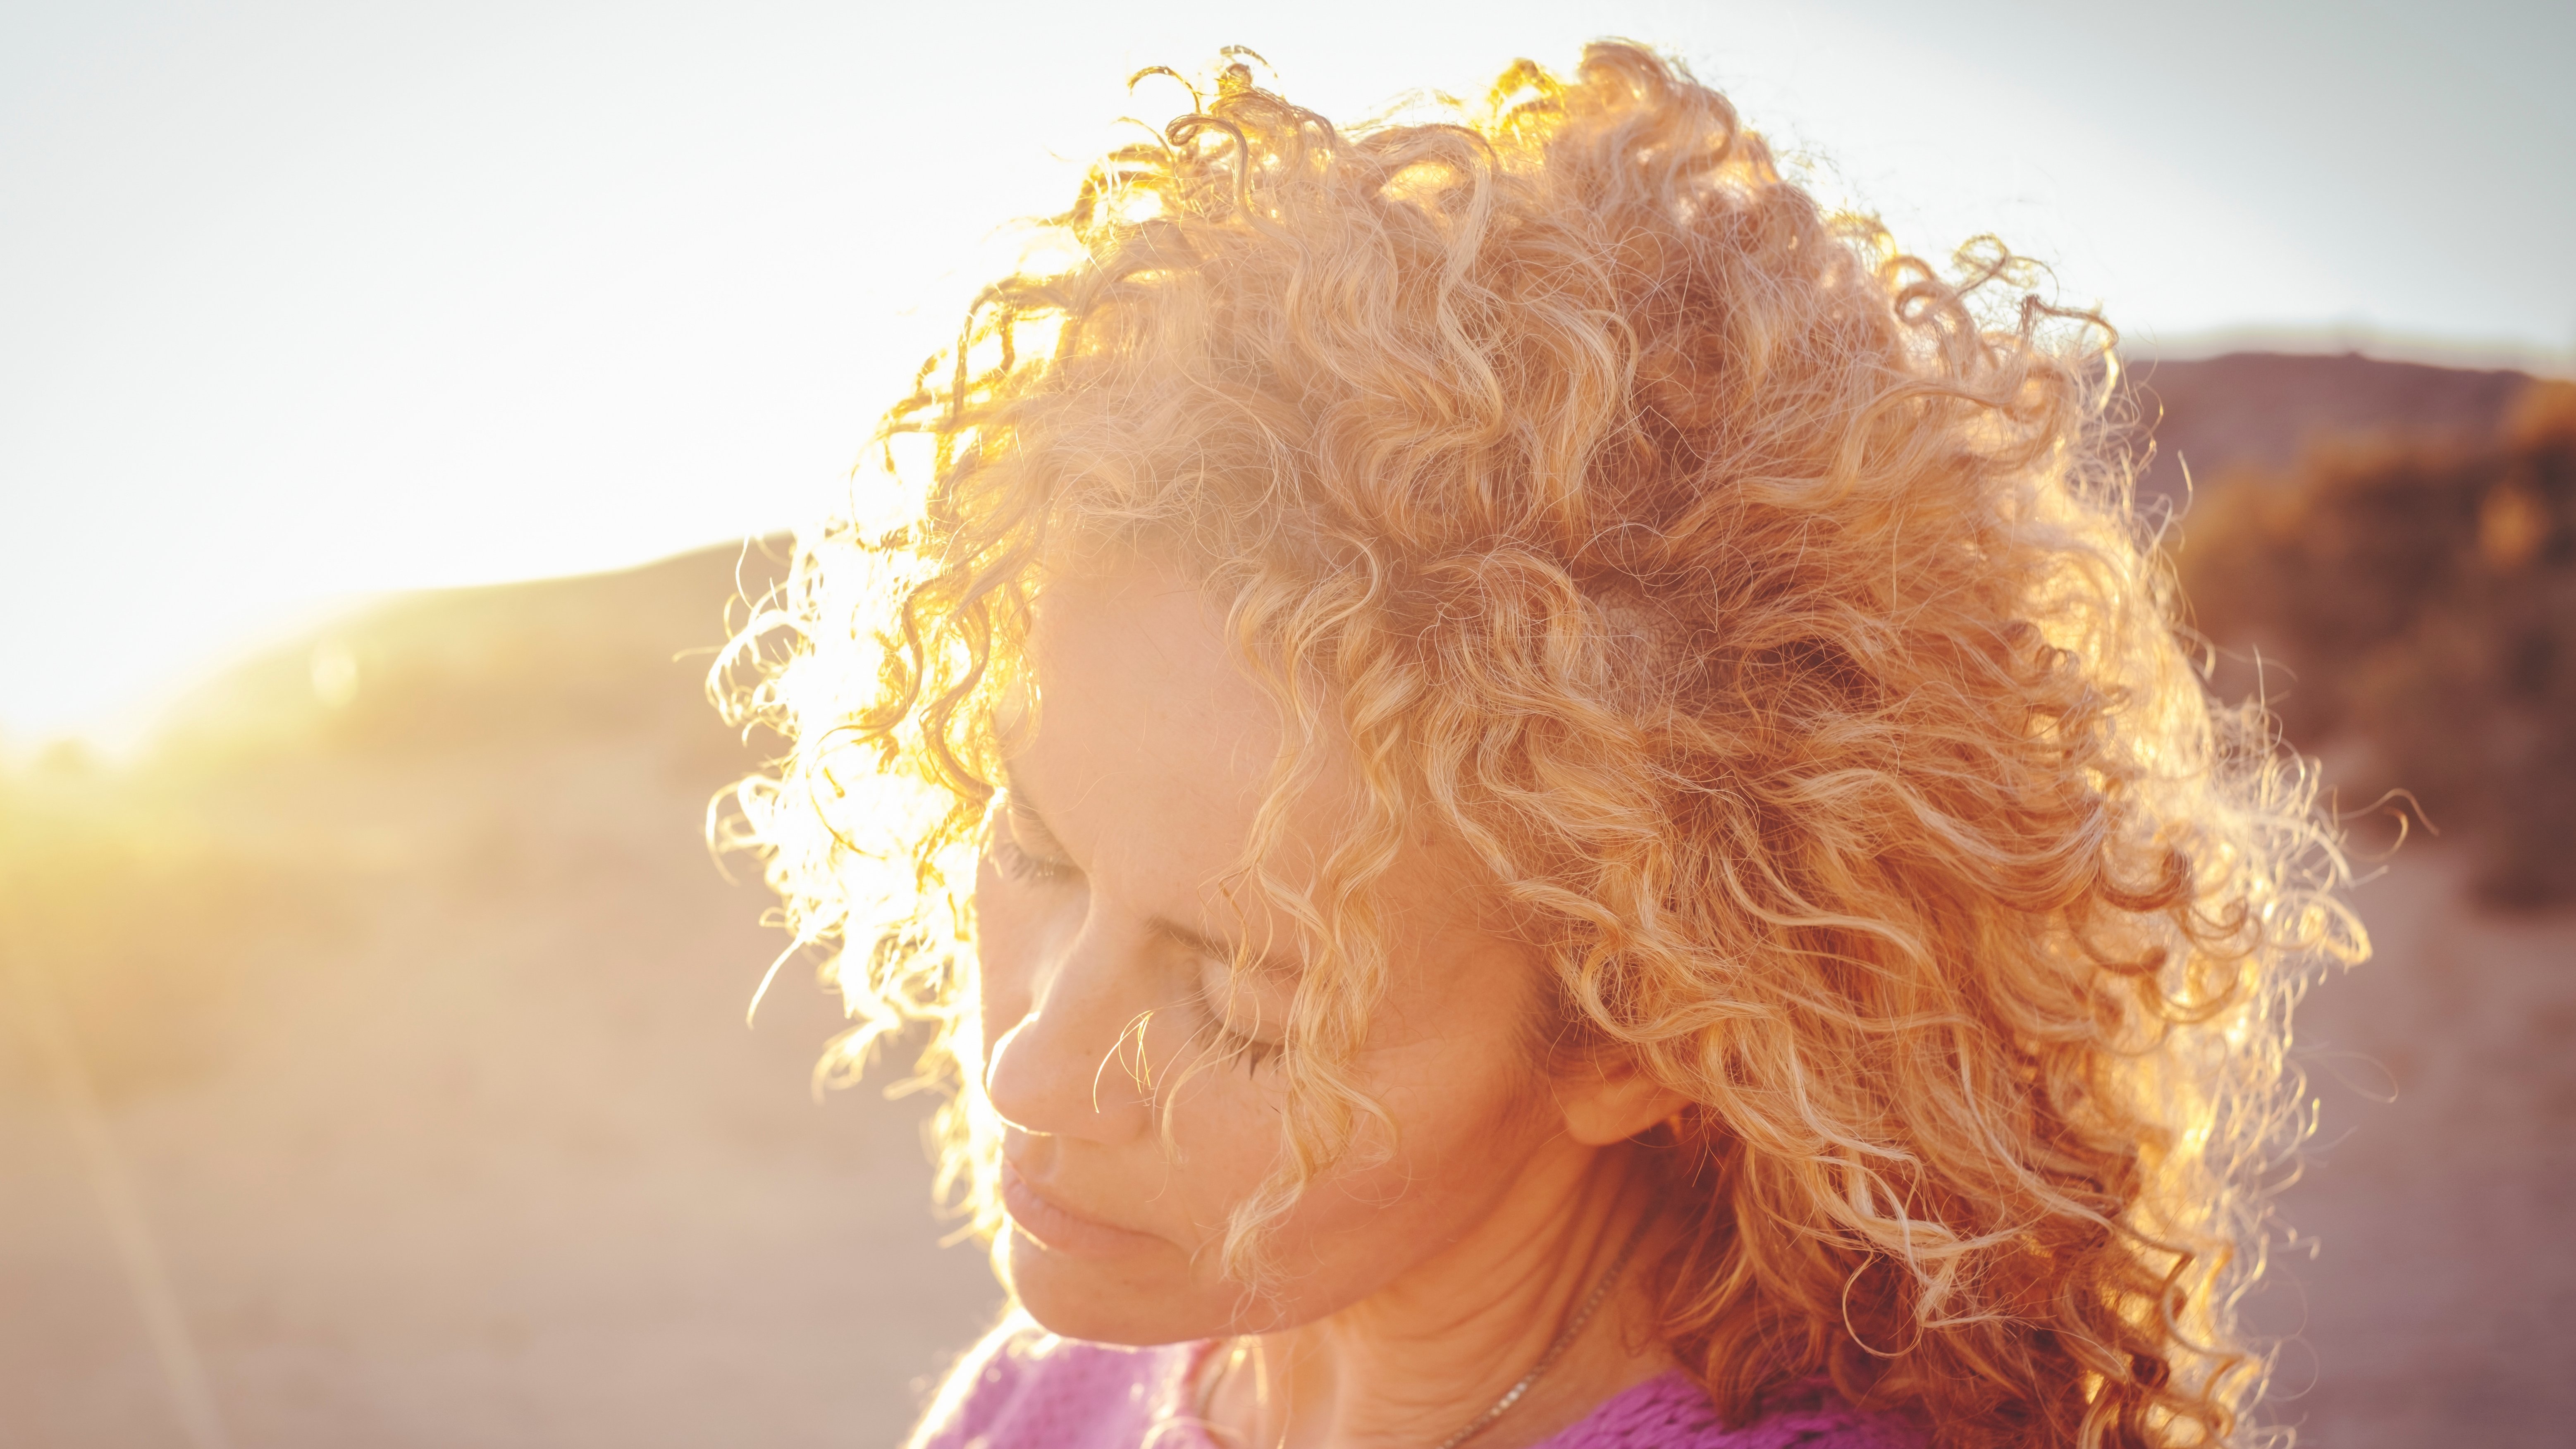 A woman with blonde curls being illuminated by the autumn sun.